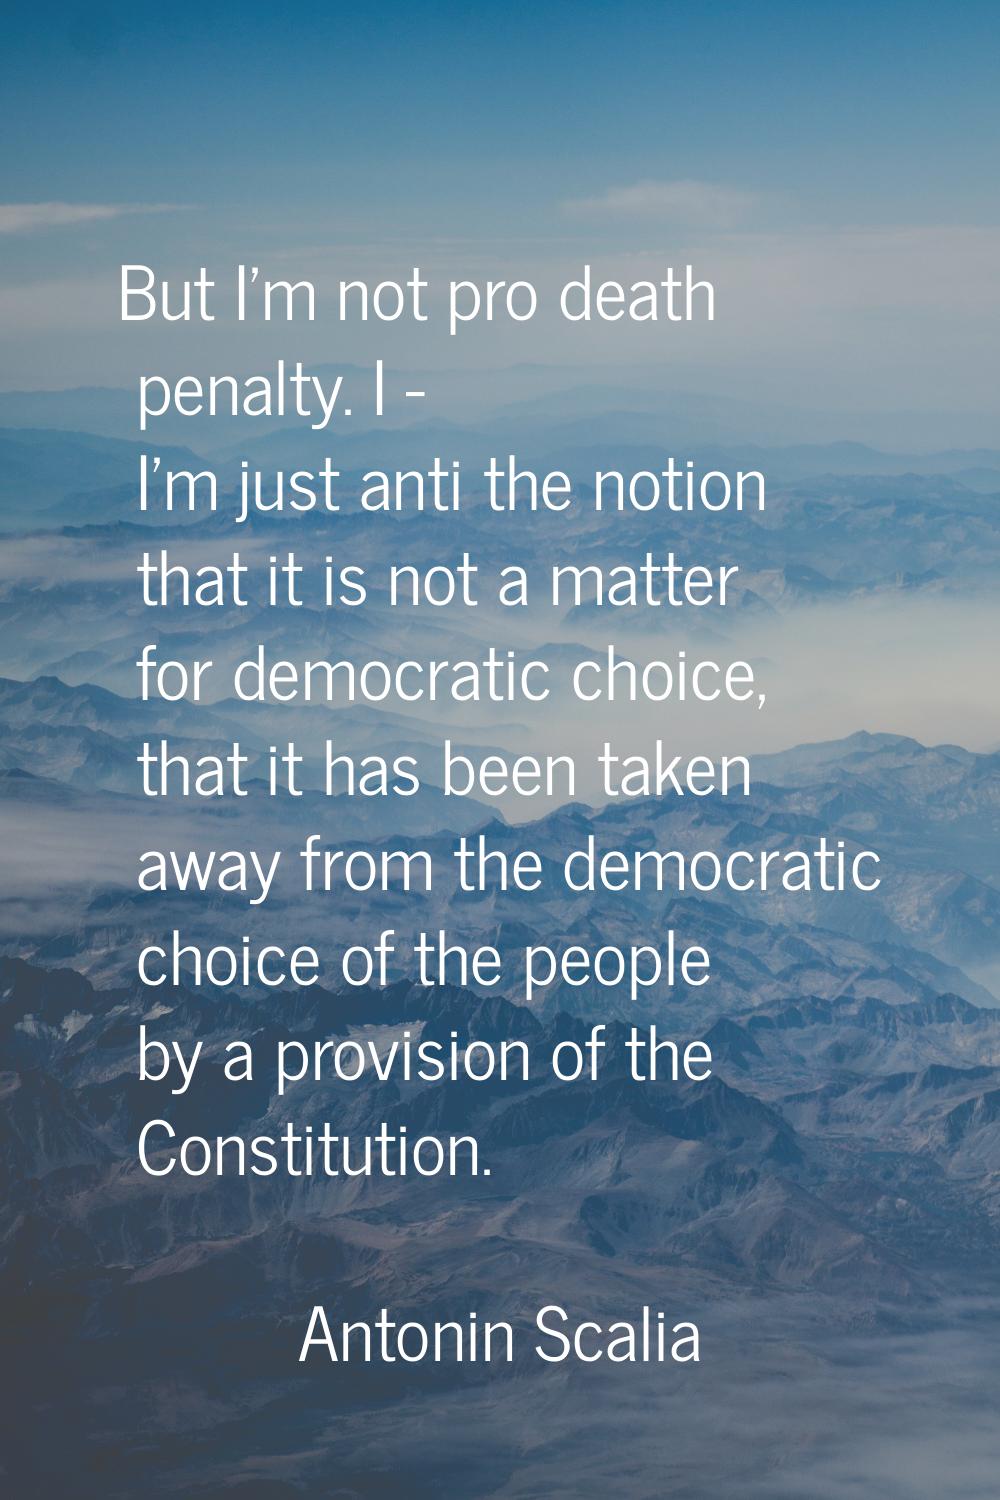 But I'm not pro death penalty. I - I'm just anti the notion that it is not a matter for democratic 